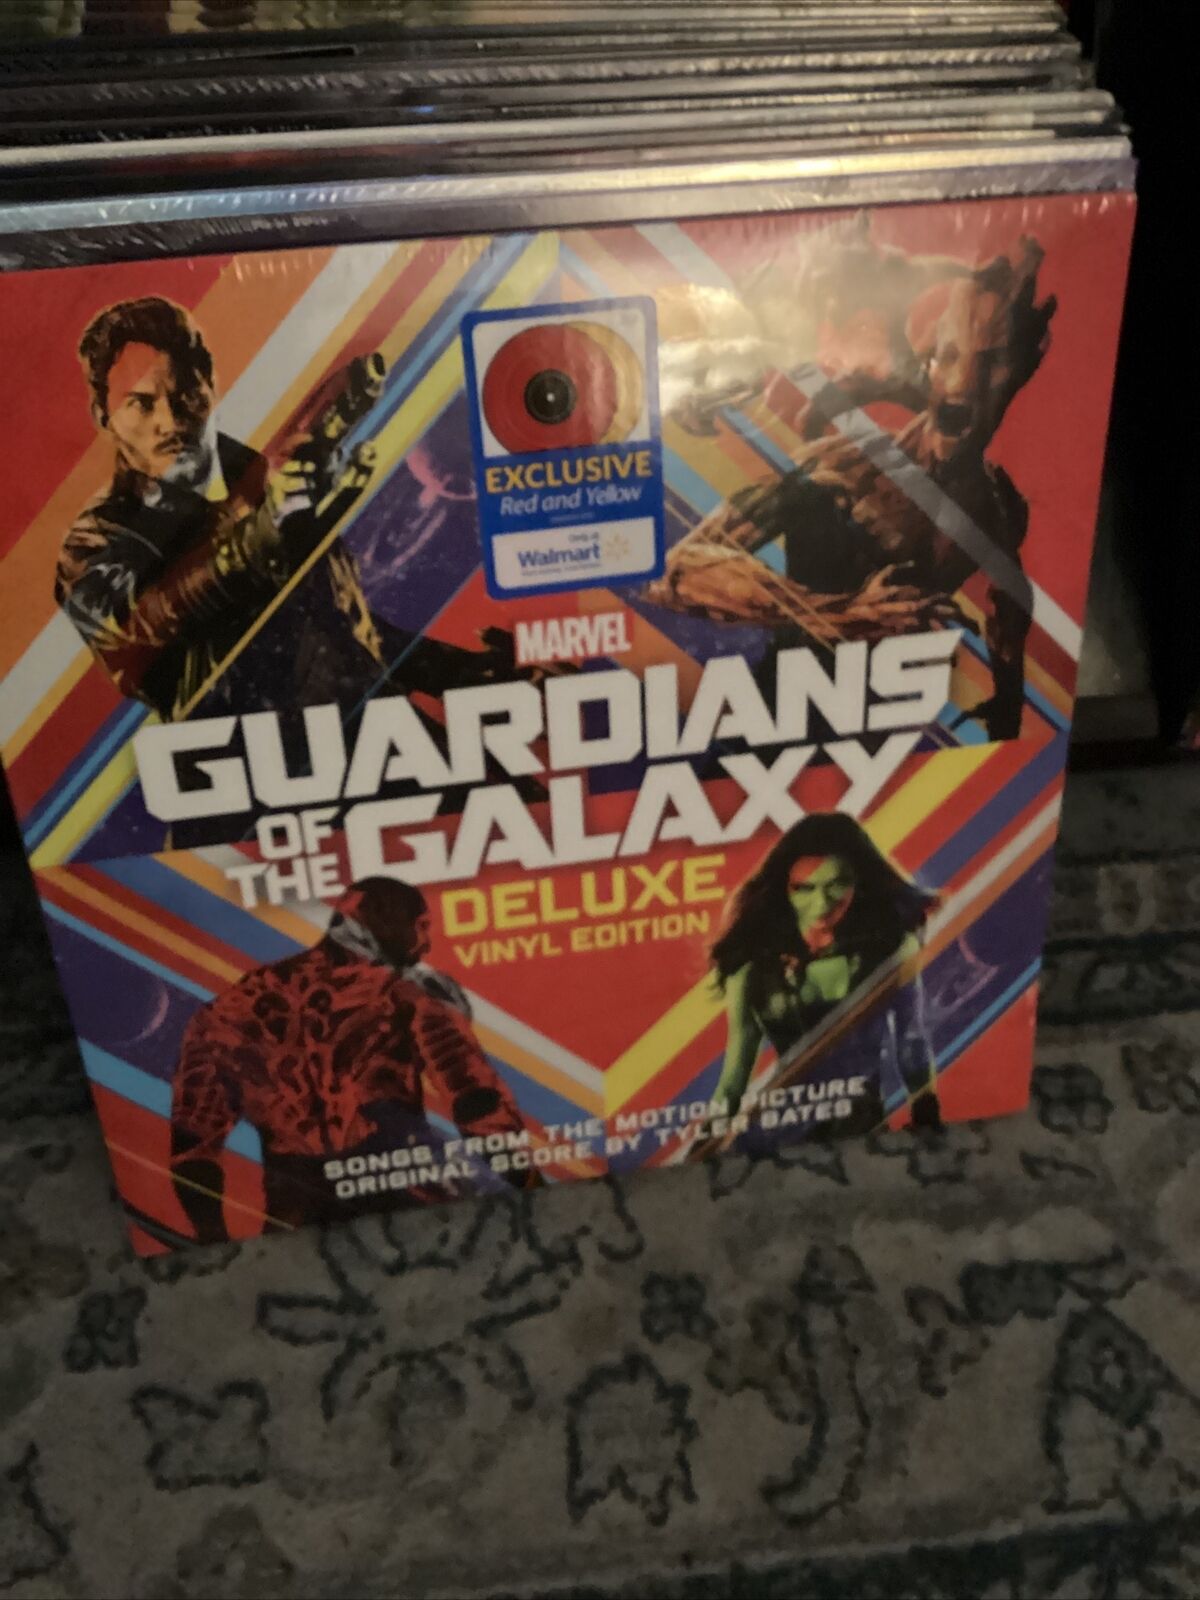 Guardians of the Galaxy (Songs From the Motion Picture) (Deluxe Edition) by...